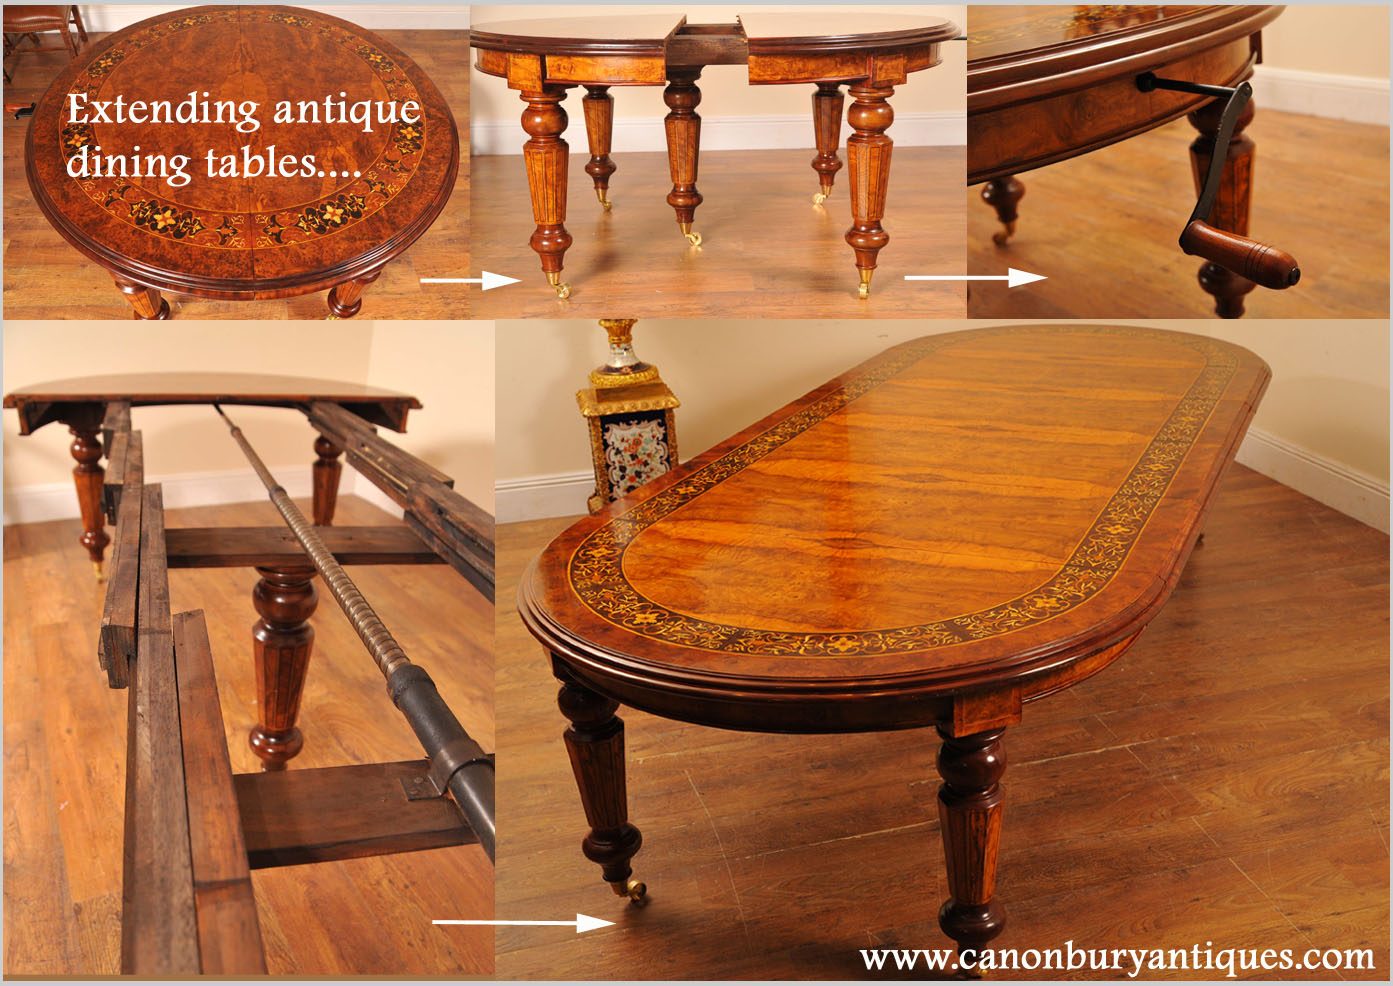 Many of our Victorian dining table can extend using a leaf system